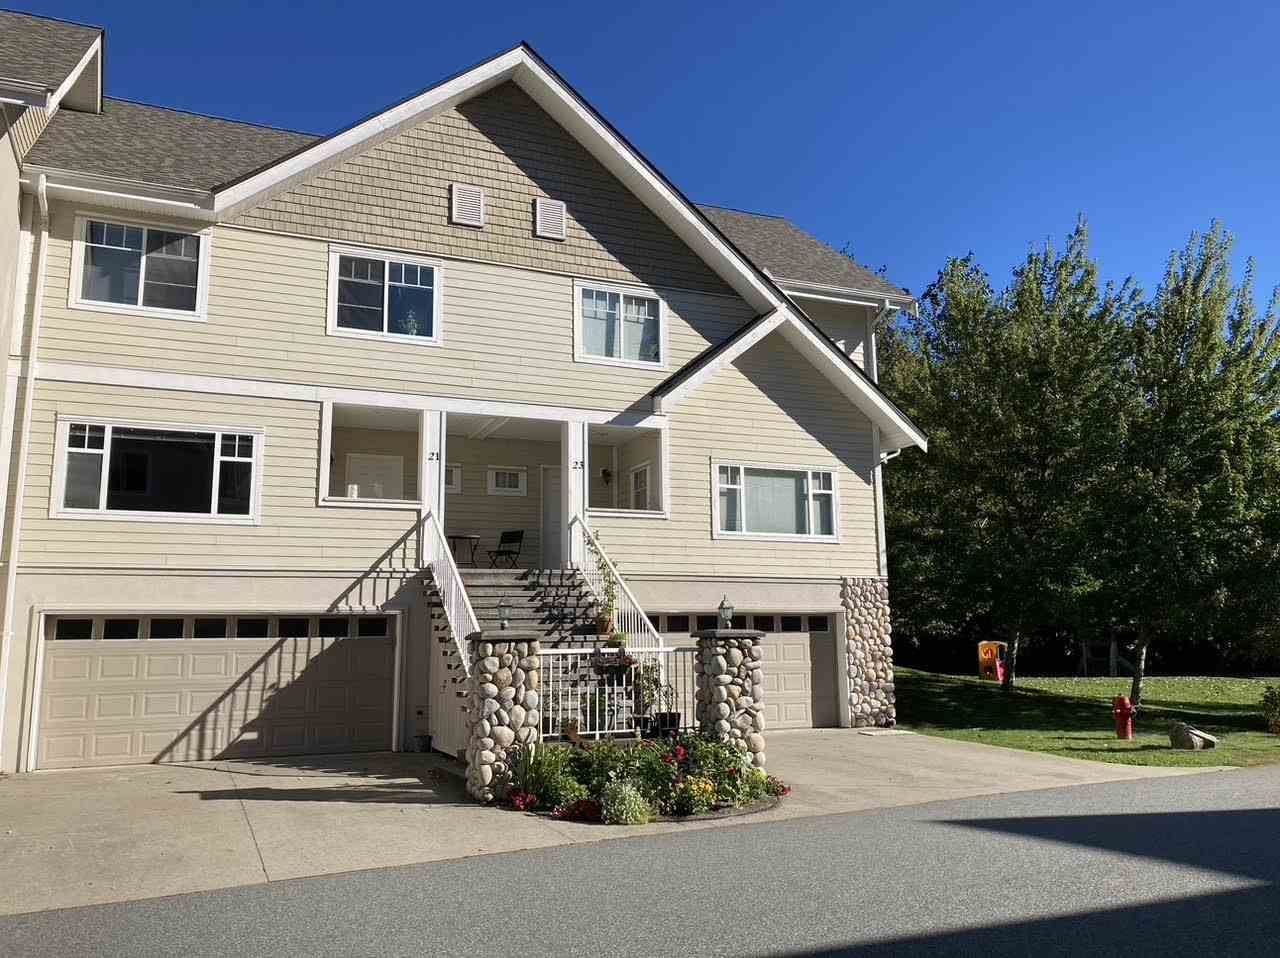 Photo 1: Photos: 21 1200 EDGEWATER Drive in Squamish: Northyards Townhouse for sale : MLS®# R2514727